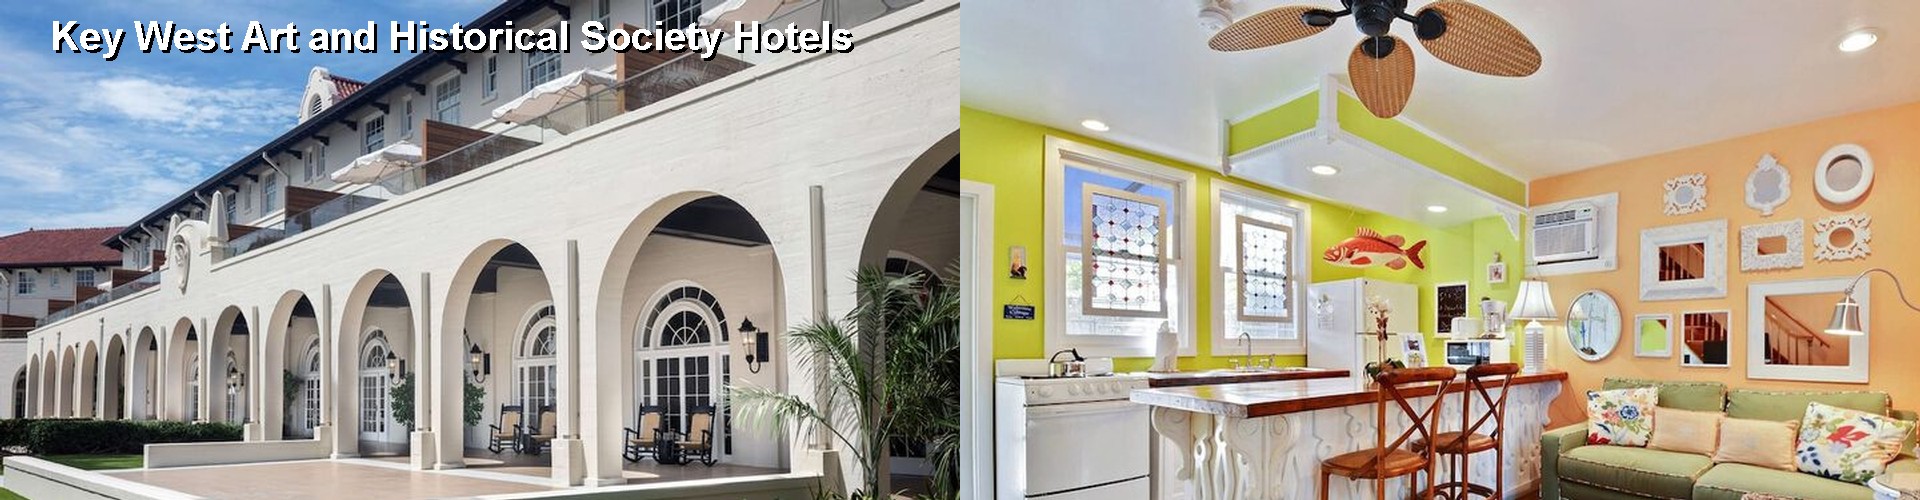 5 Best Hotels near Key West Art and Historical Society